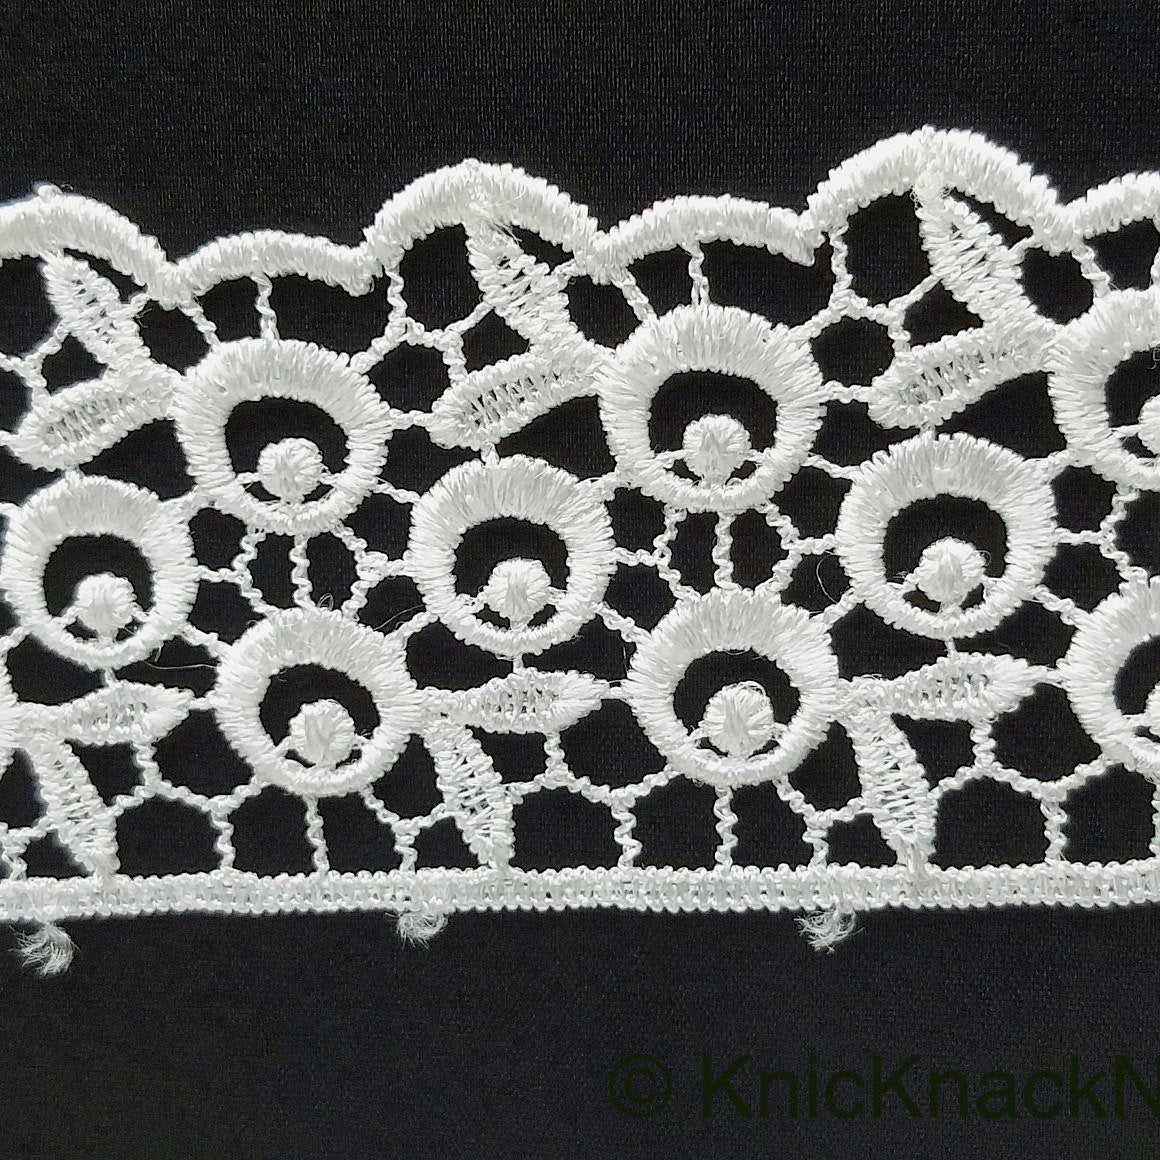 Off White Flower Embroidery Floral Lace Trim, Crochet Lace, Dyeable Trim